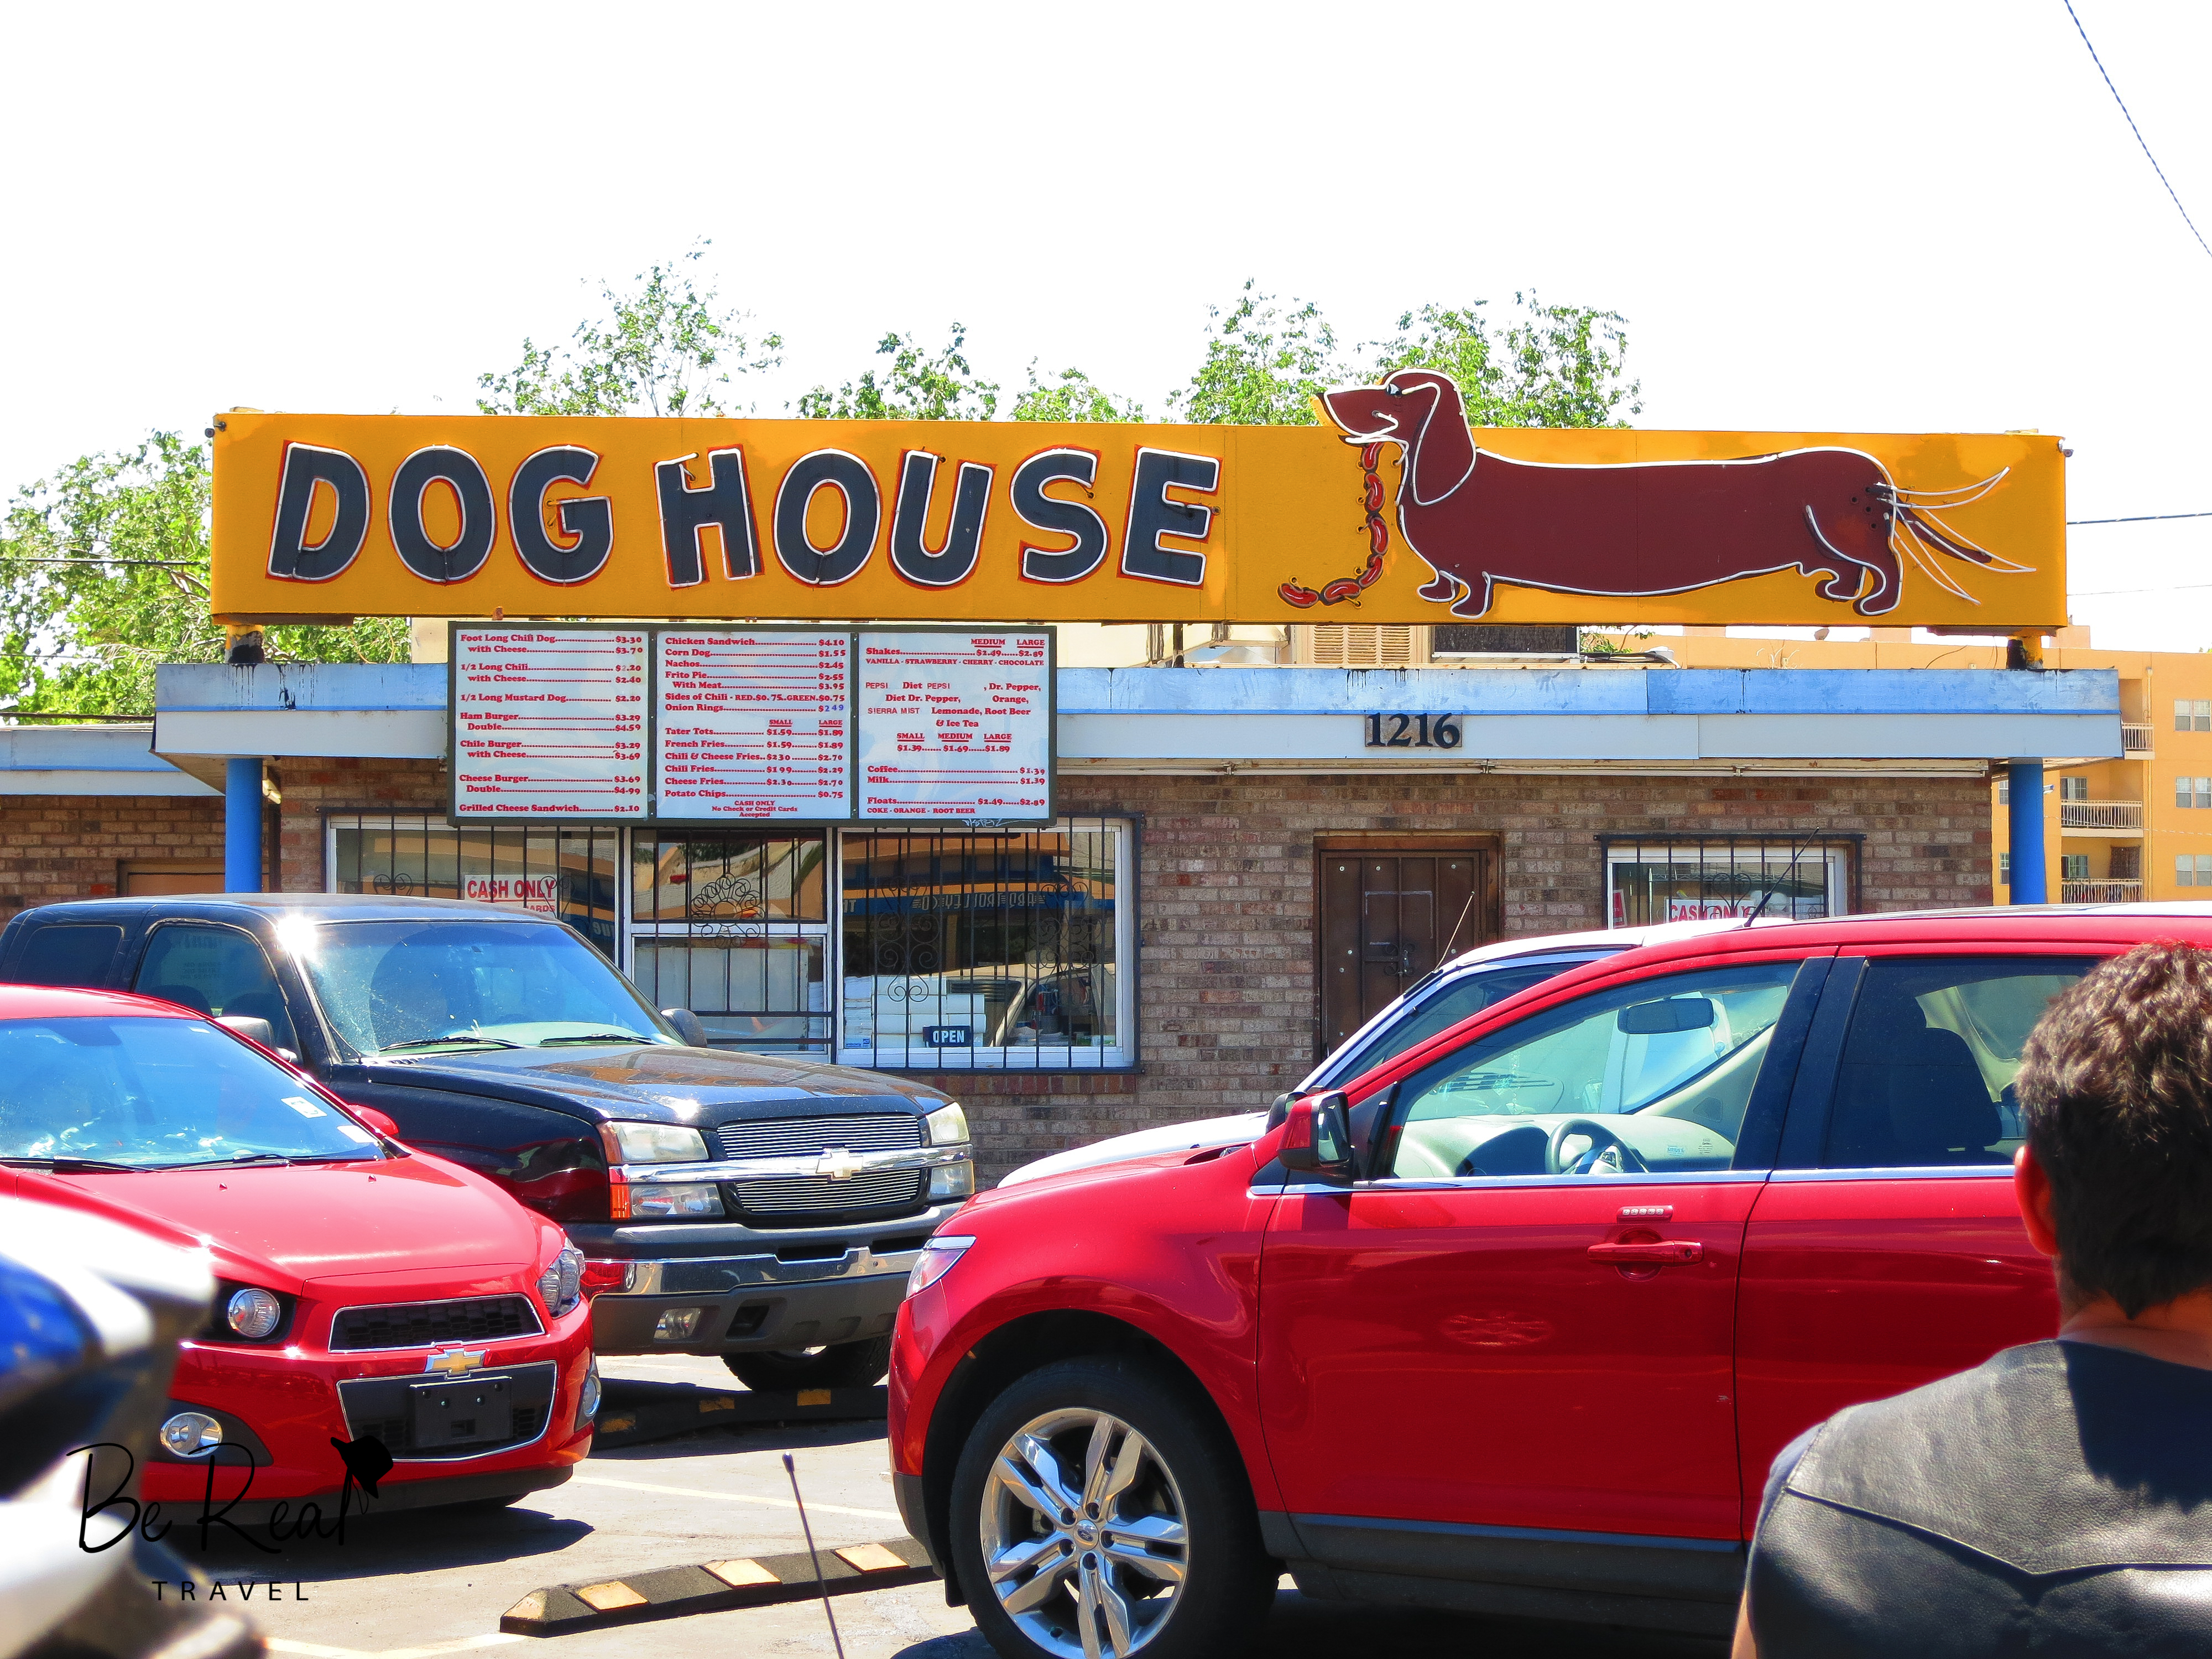 An lengthy dog holds mini hot digs in its mouth on a sign for the Dog House eatery; Jesse Pinkman bought a gun here in New Mexico Breaking Bad